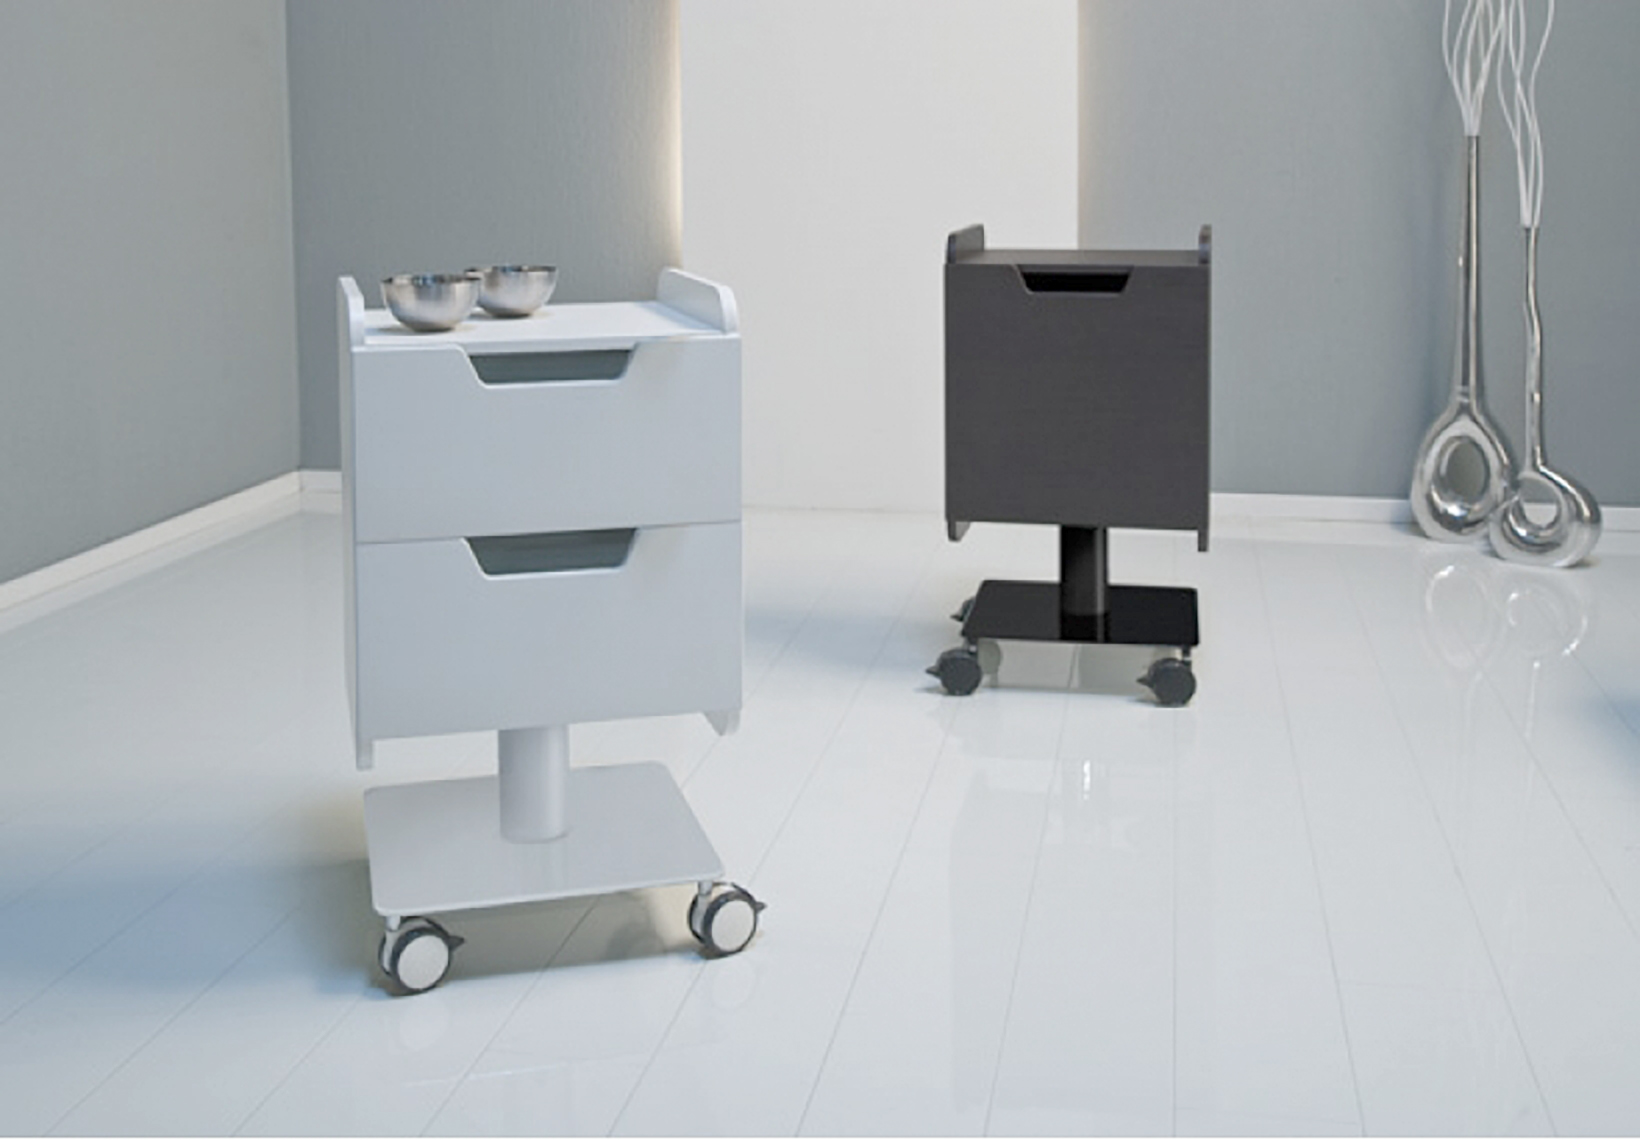 Cube Select Trolley